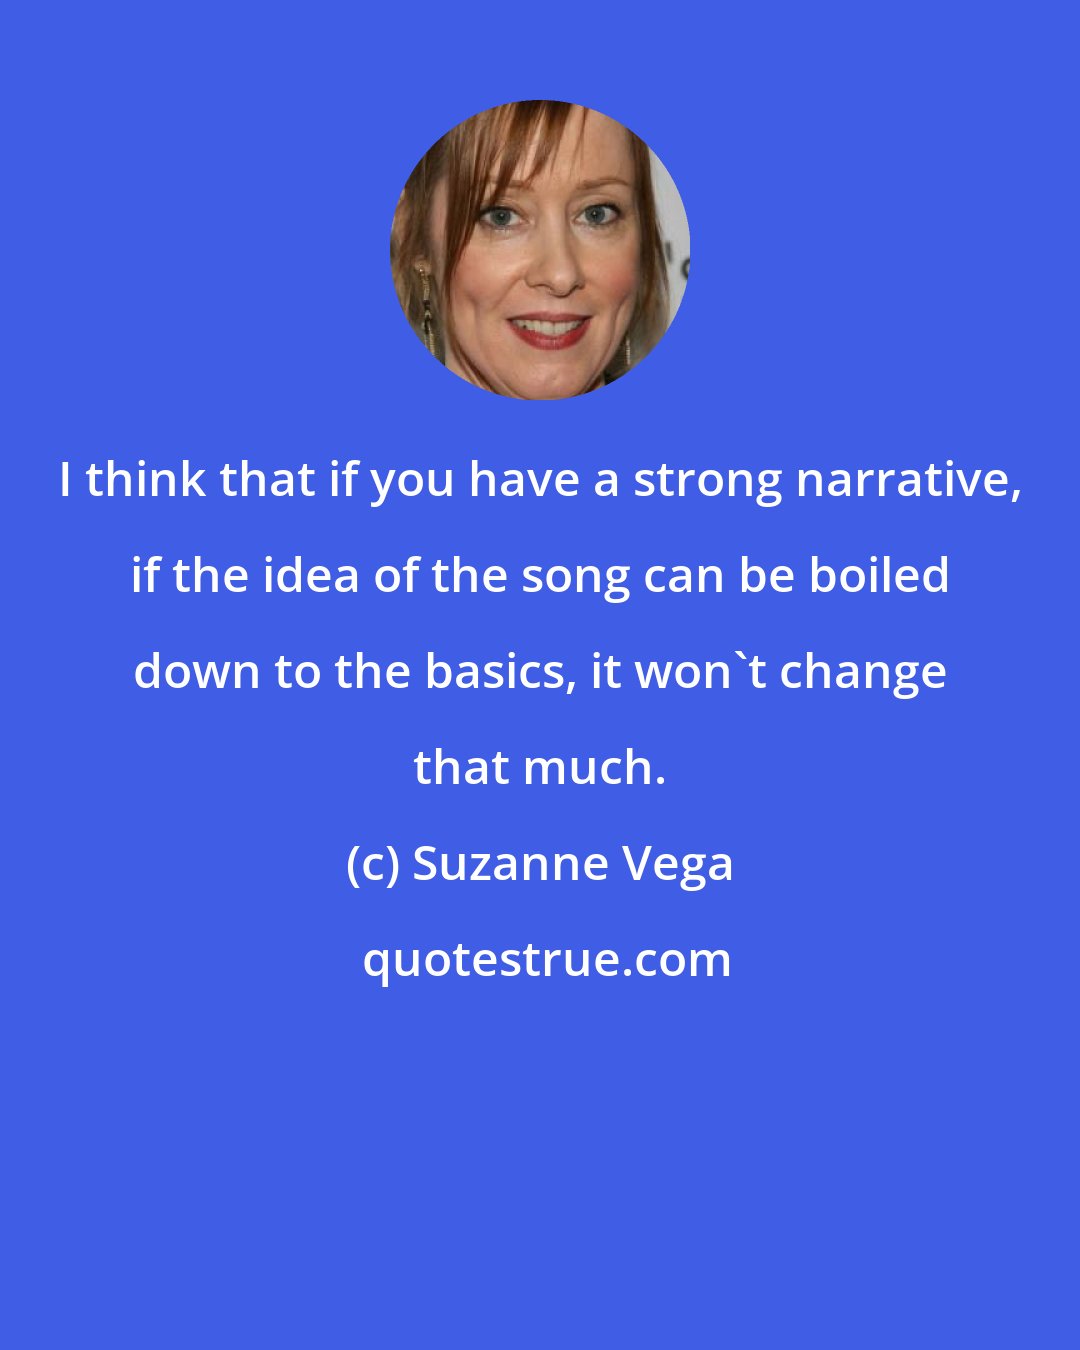 Suzanne Vega: I think that if you have a strong narrative, if the idea of the song can be boiled down to the basics, it won't change that much.